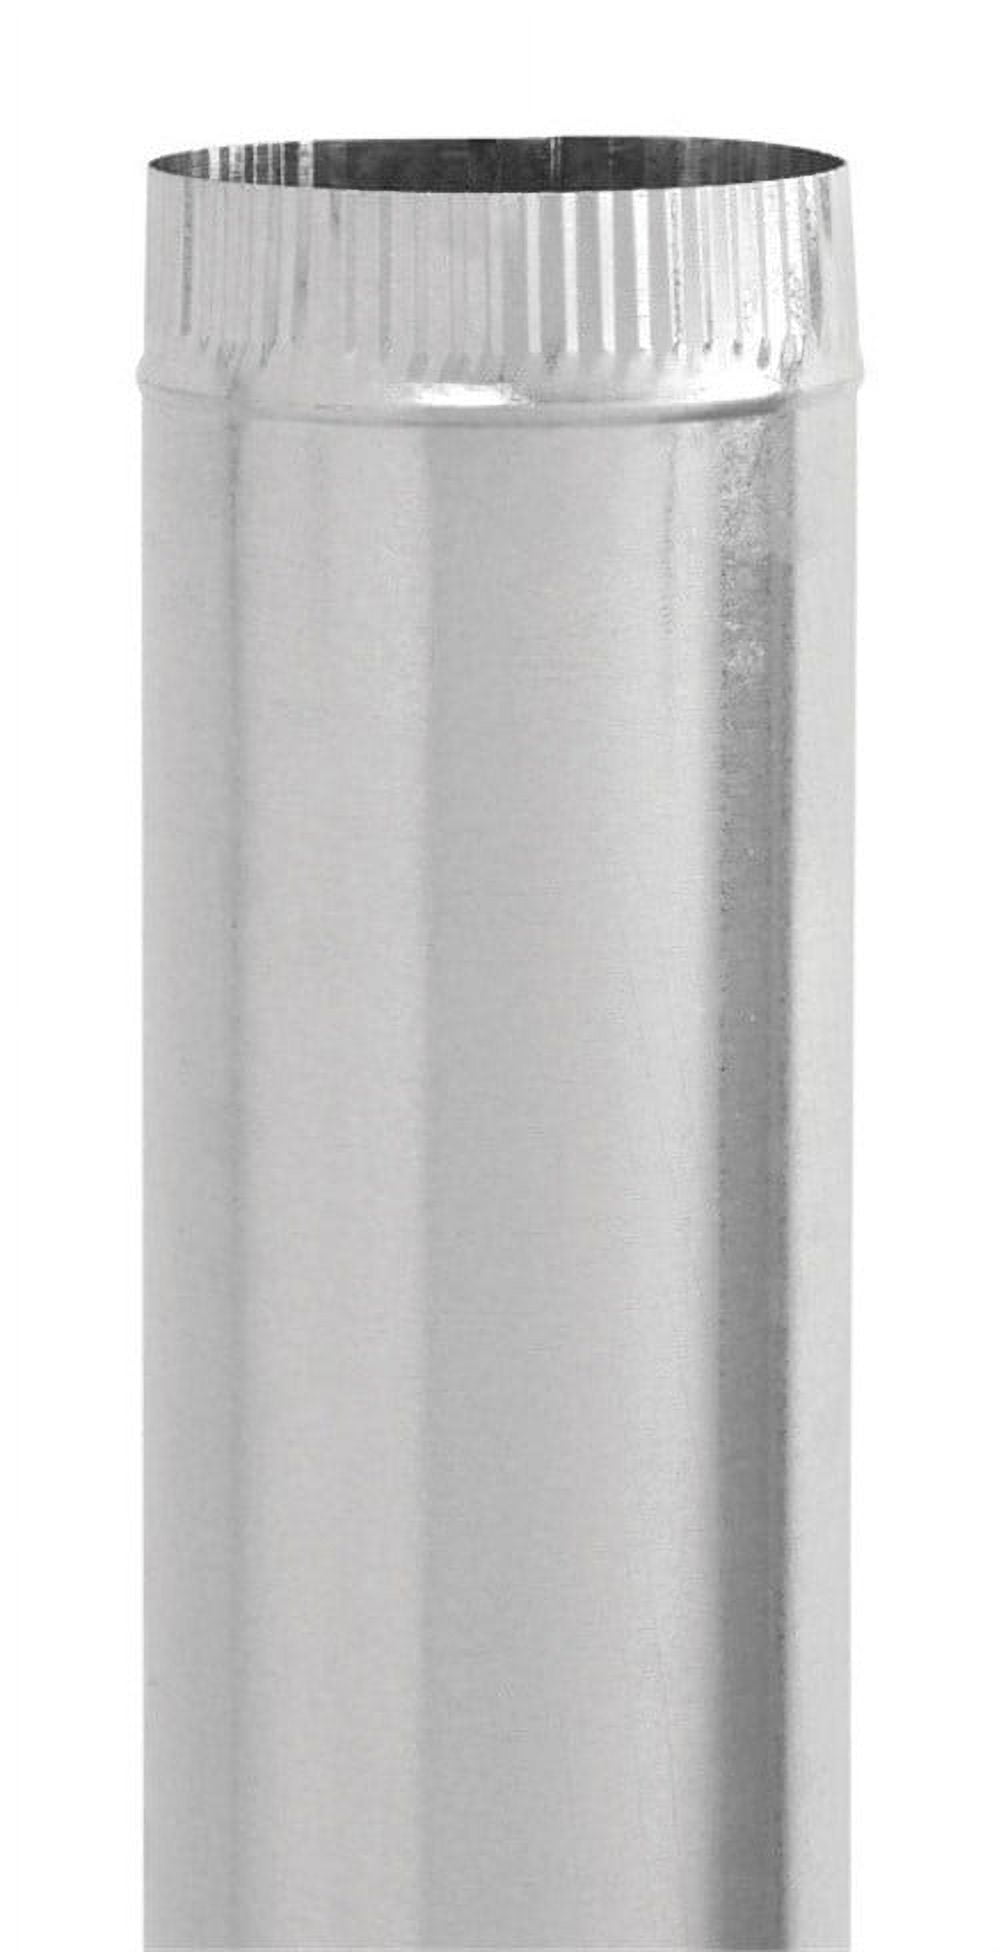 IMPERIAL MANUFACTURING GROUP Imperial Manufacturing 44597 6 in. Dia. x 30 in. Galvanized Steel Furnace Pipe - Silver, Pack of 10